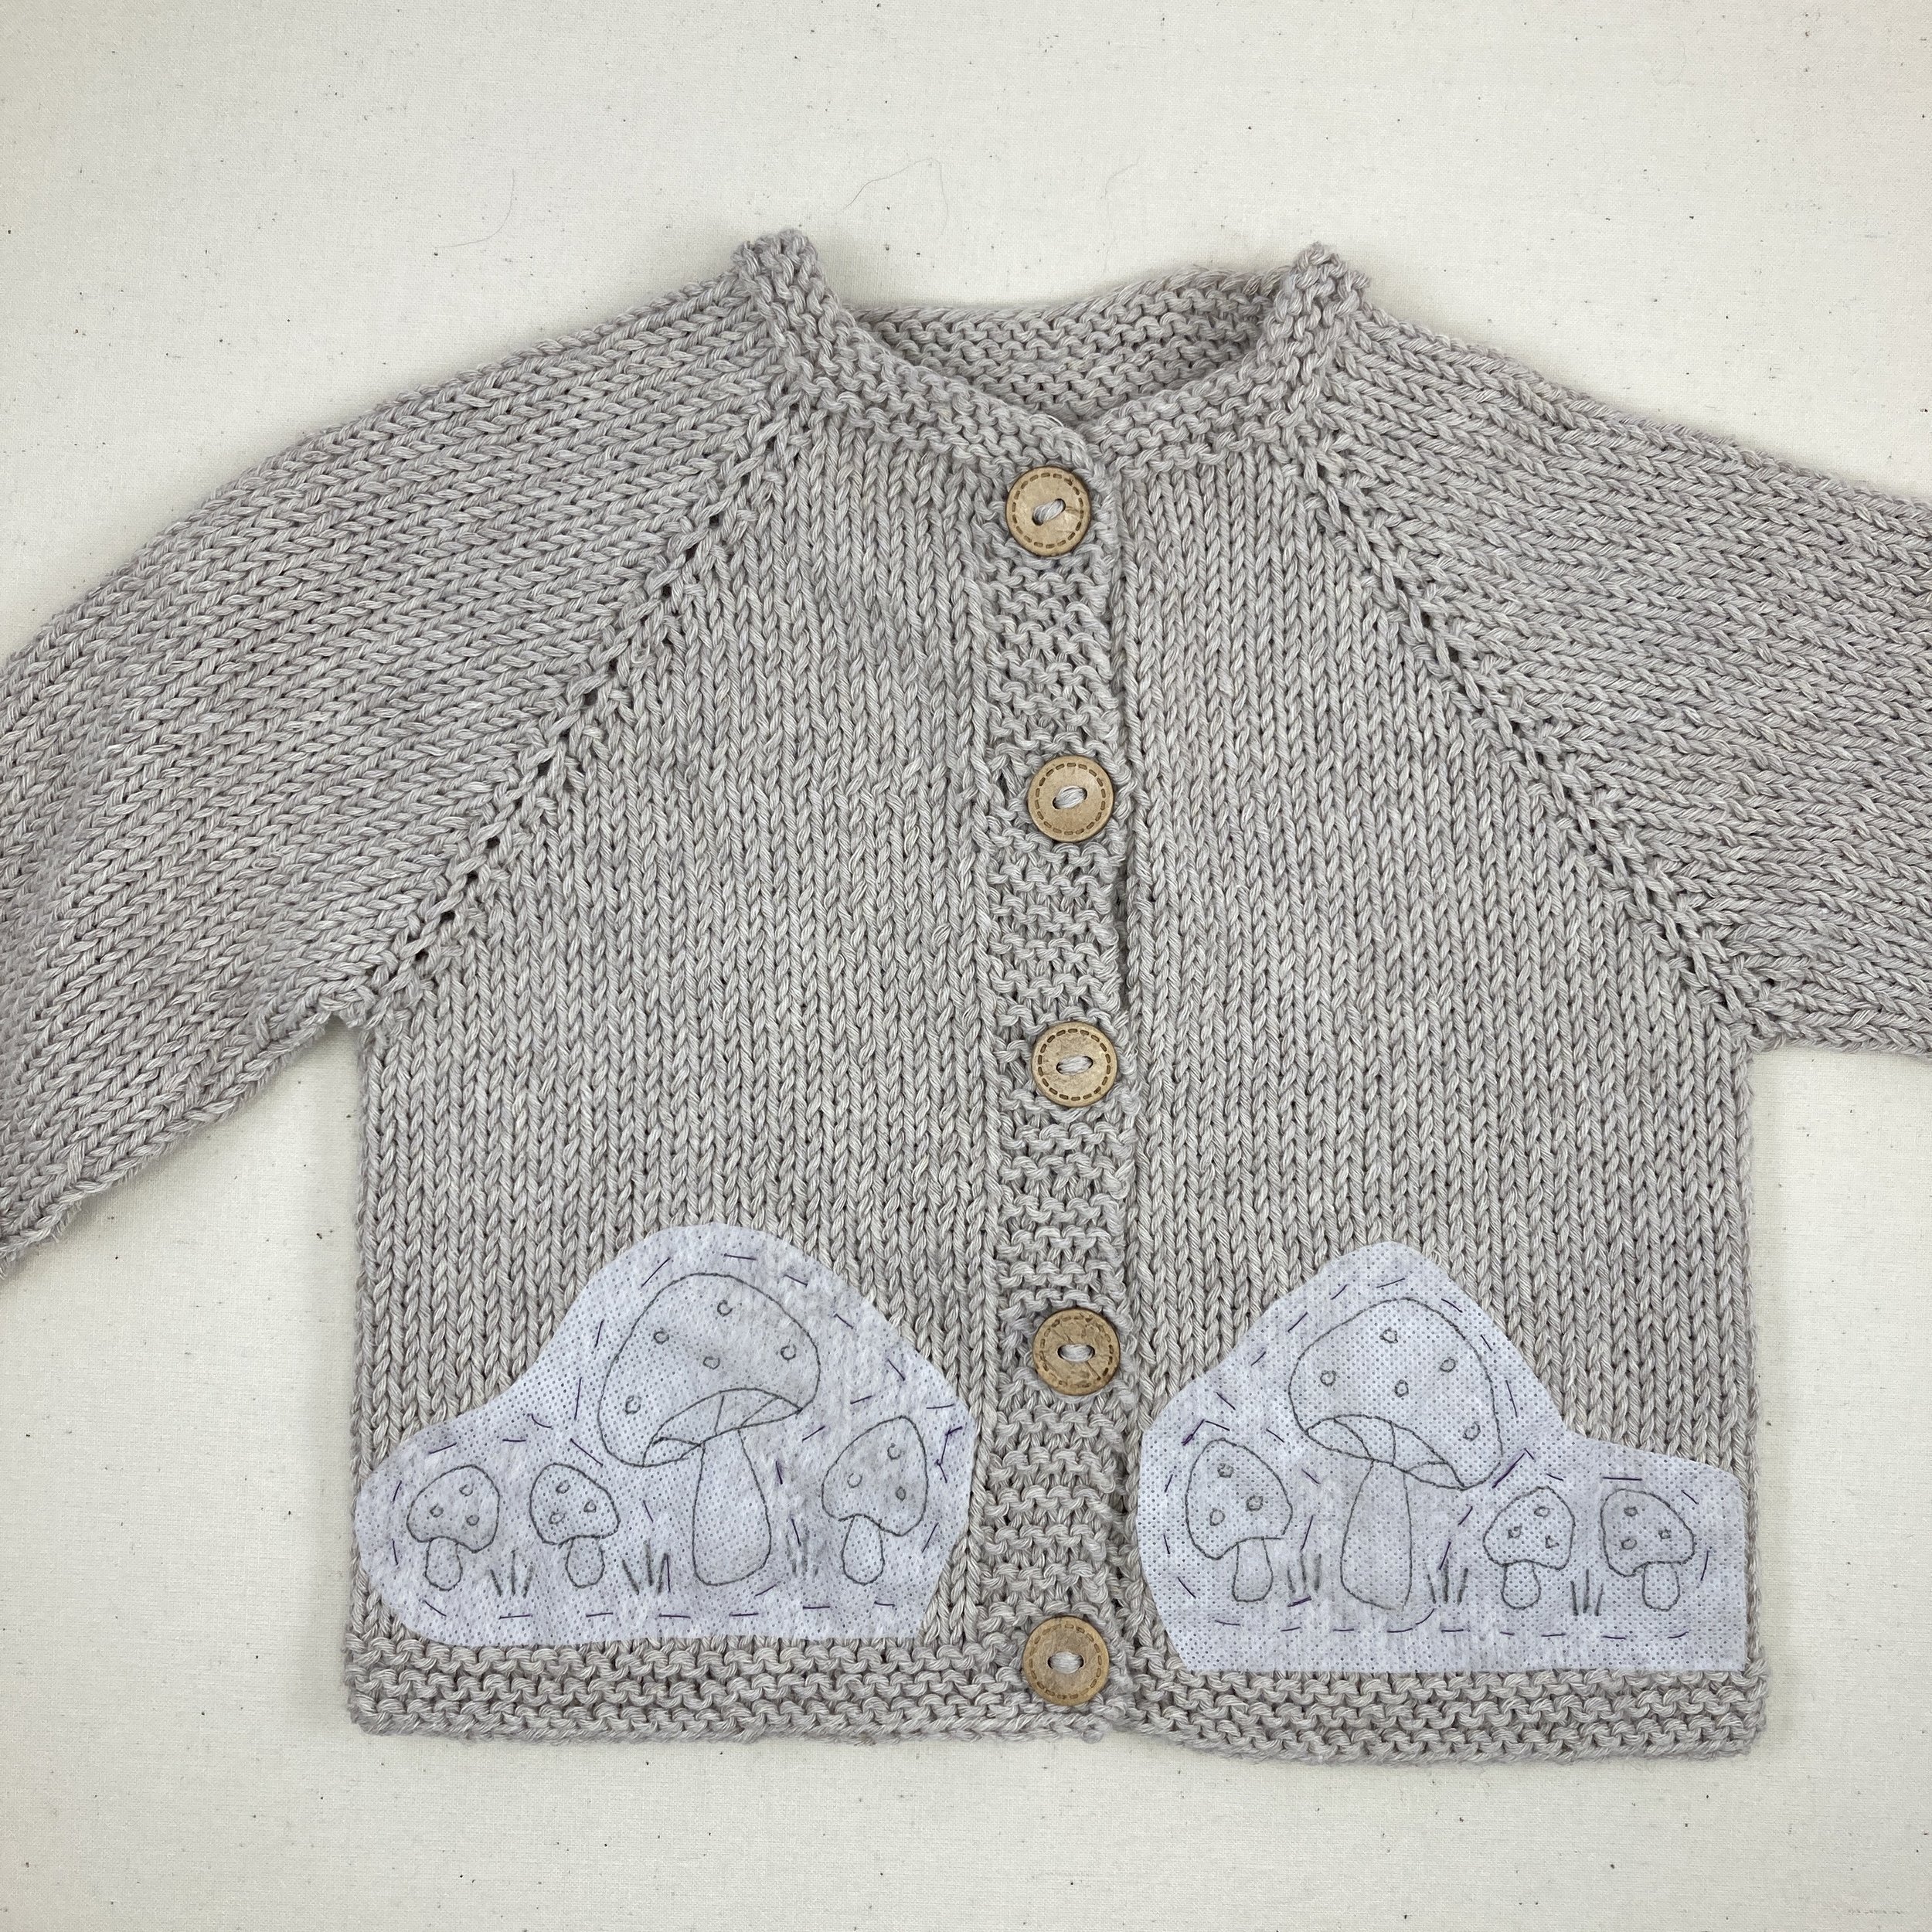 I want to learn how to do this sort of embroidery on my knitted items.  Where do I start? : r/knitting